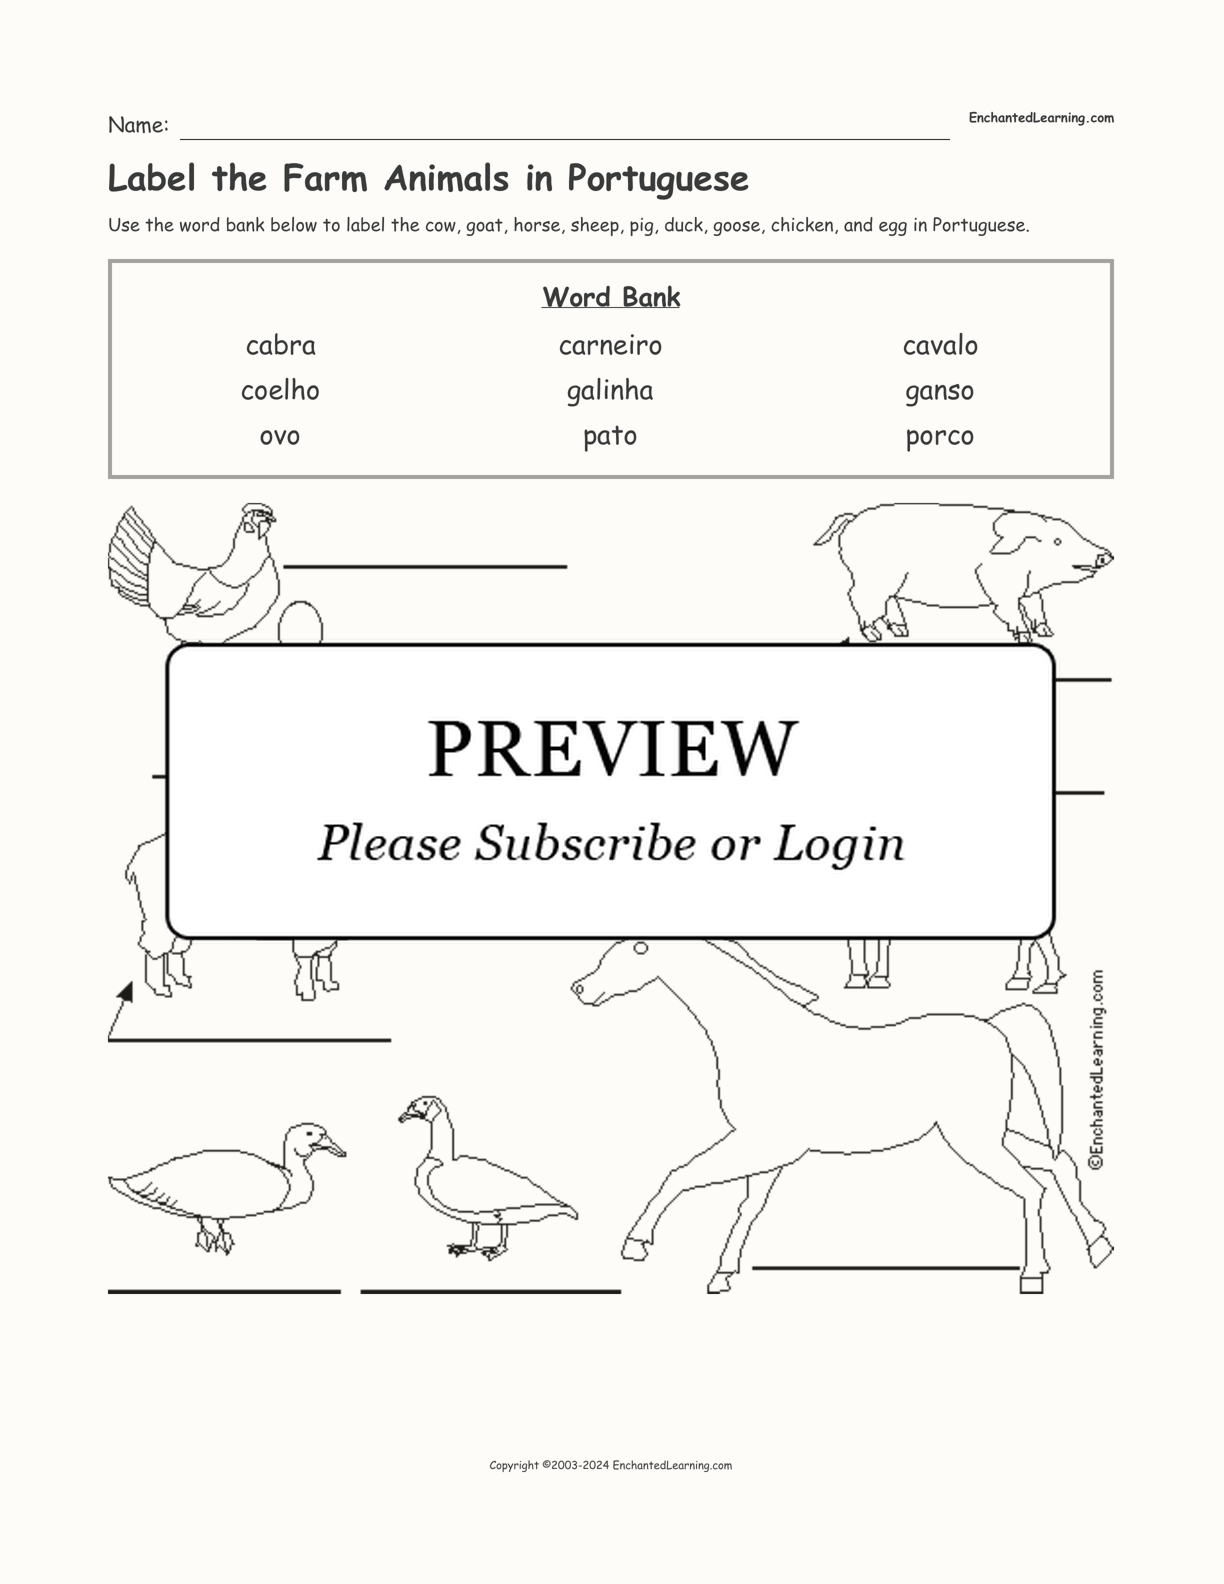 Label the Farm Animals in Portuguese interactive worksheet page 1